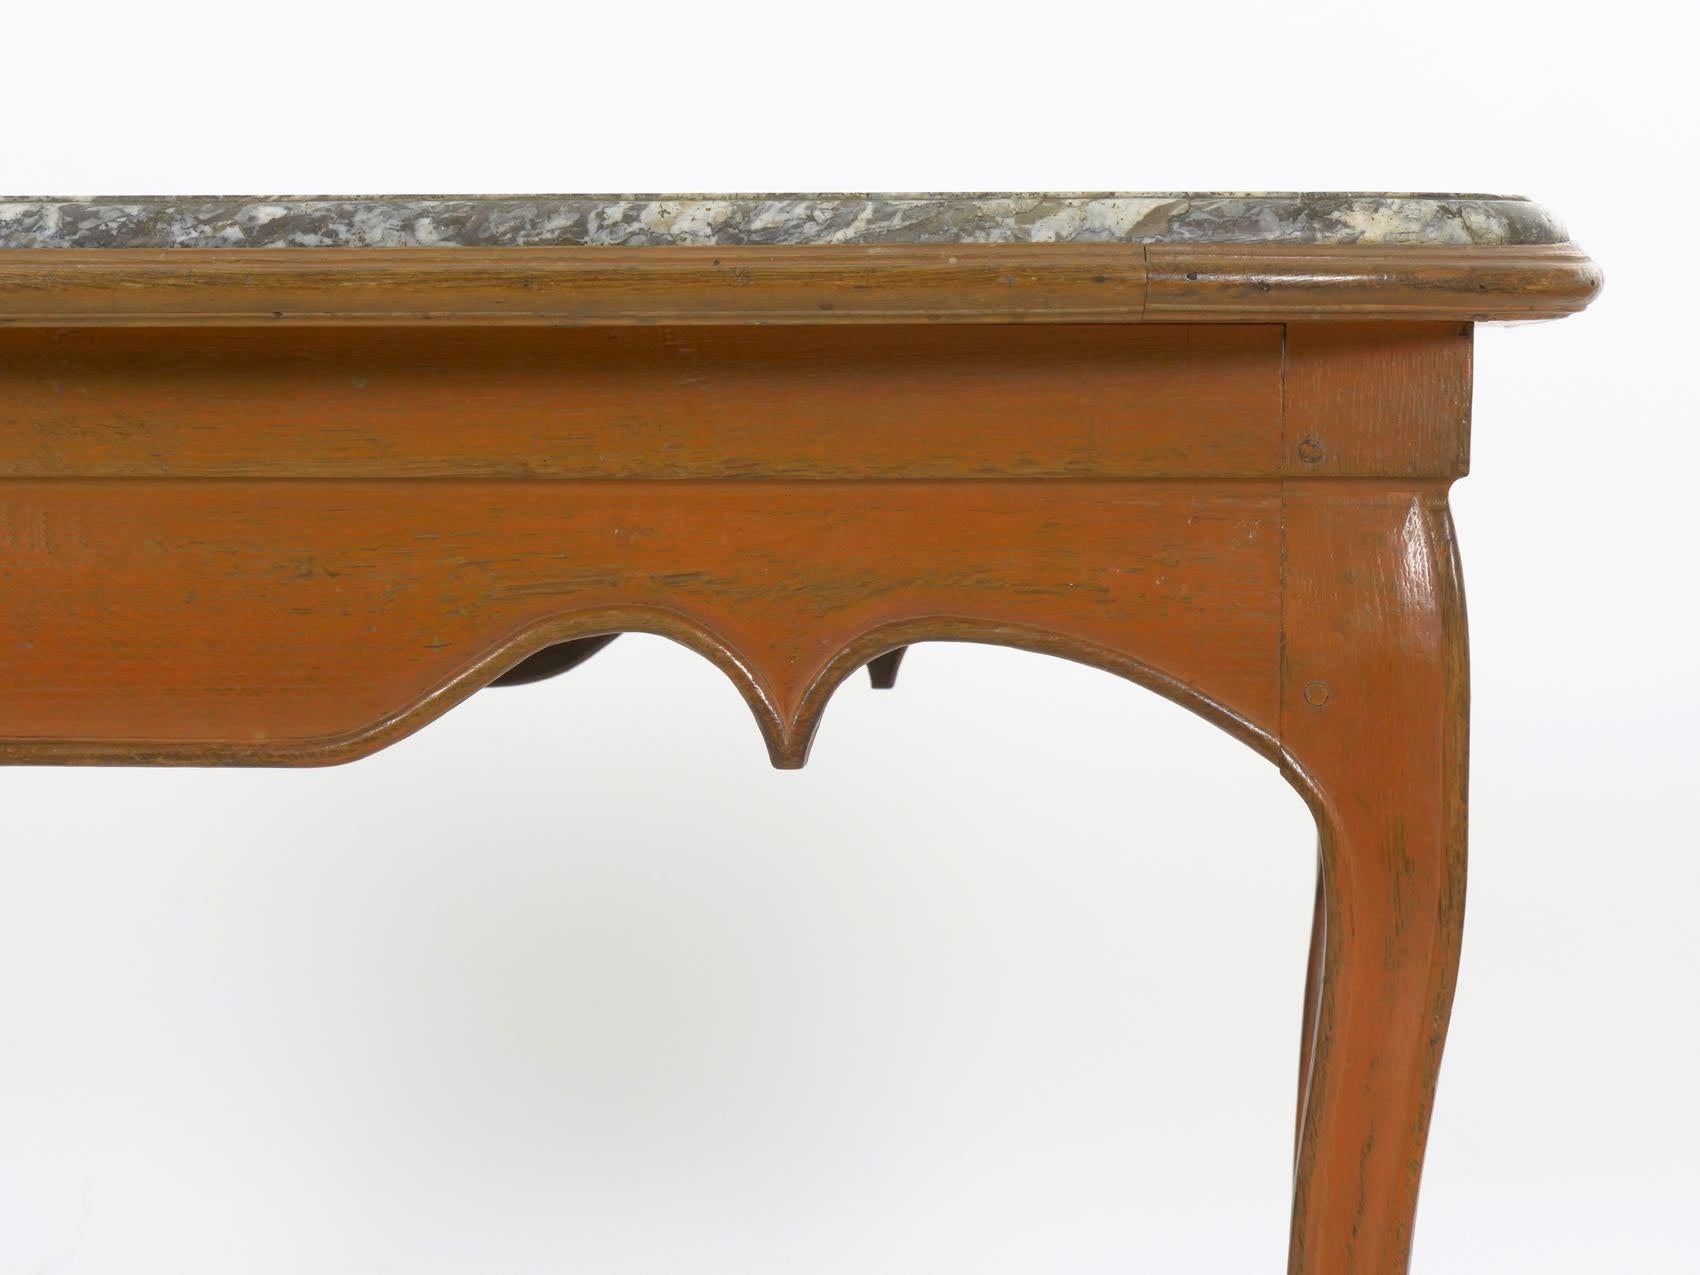 LOUIS XV STYLE PAINTED CONSOLE TABLE WITH GRAY MARBLE TOP
Continental, circa mid-to-late 19th century
Item # 906KJG05 

A piece full of movement and drama, this attractive provincial console table is a simple piece with sturdy and practical